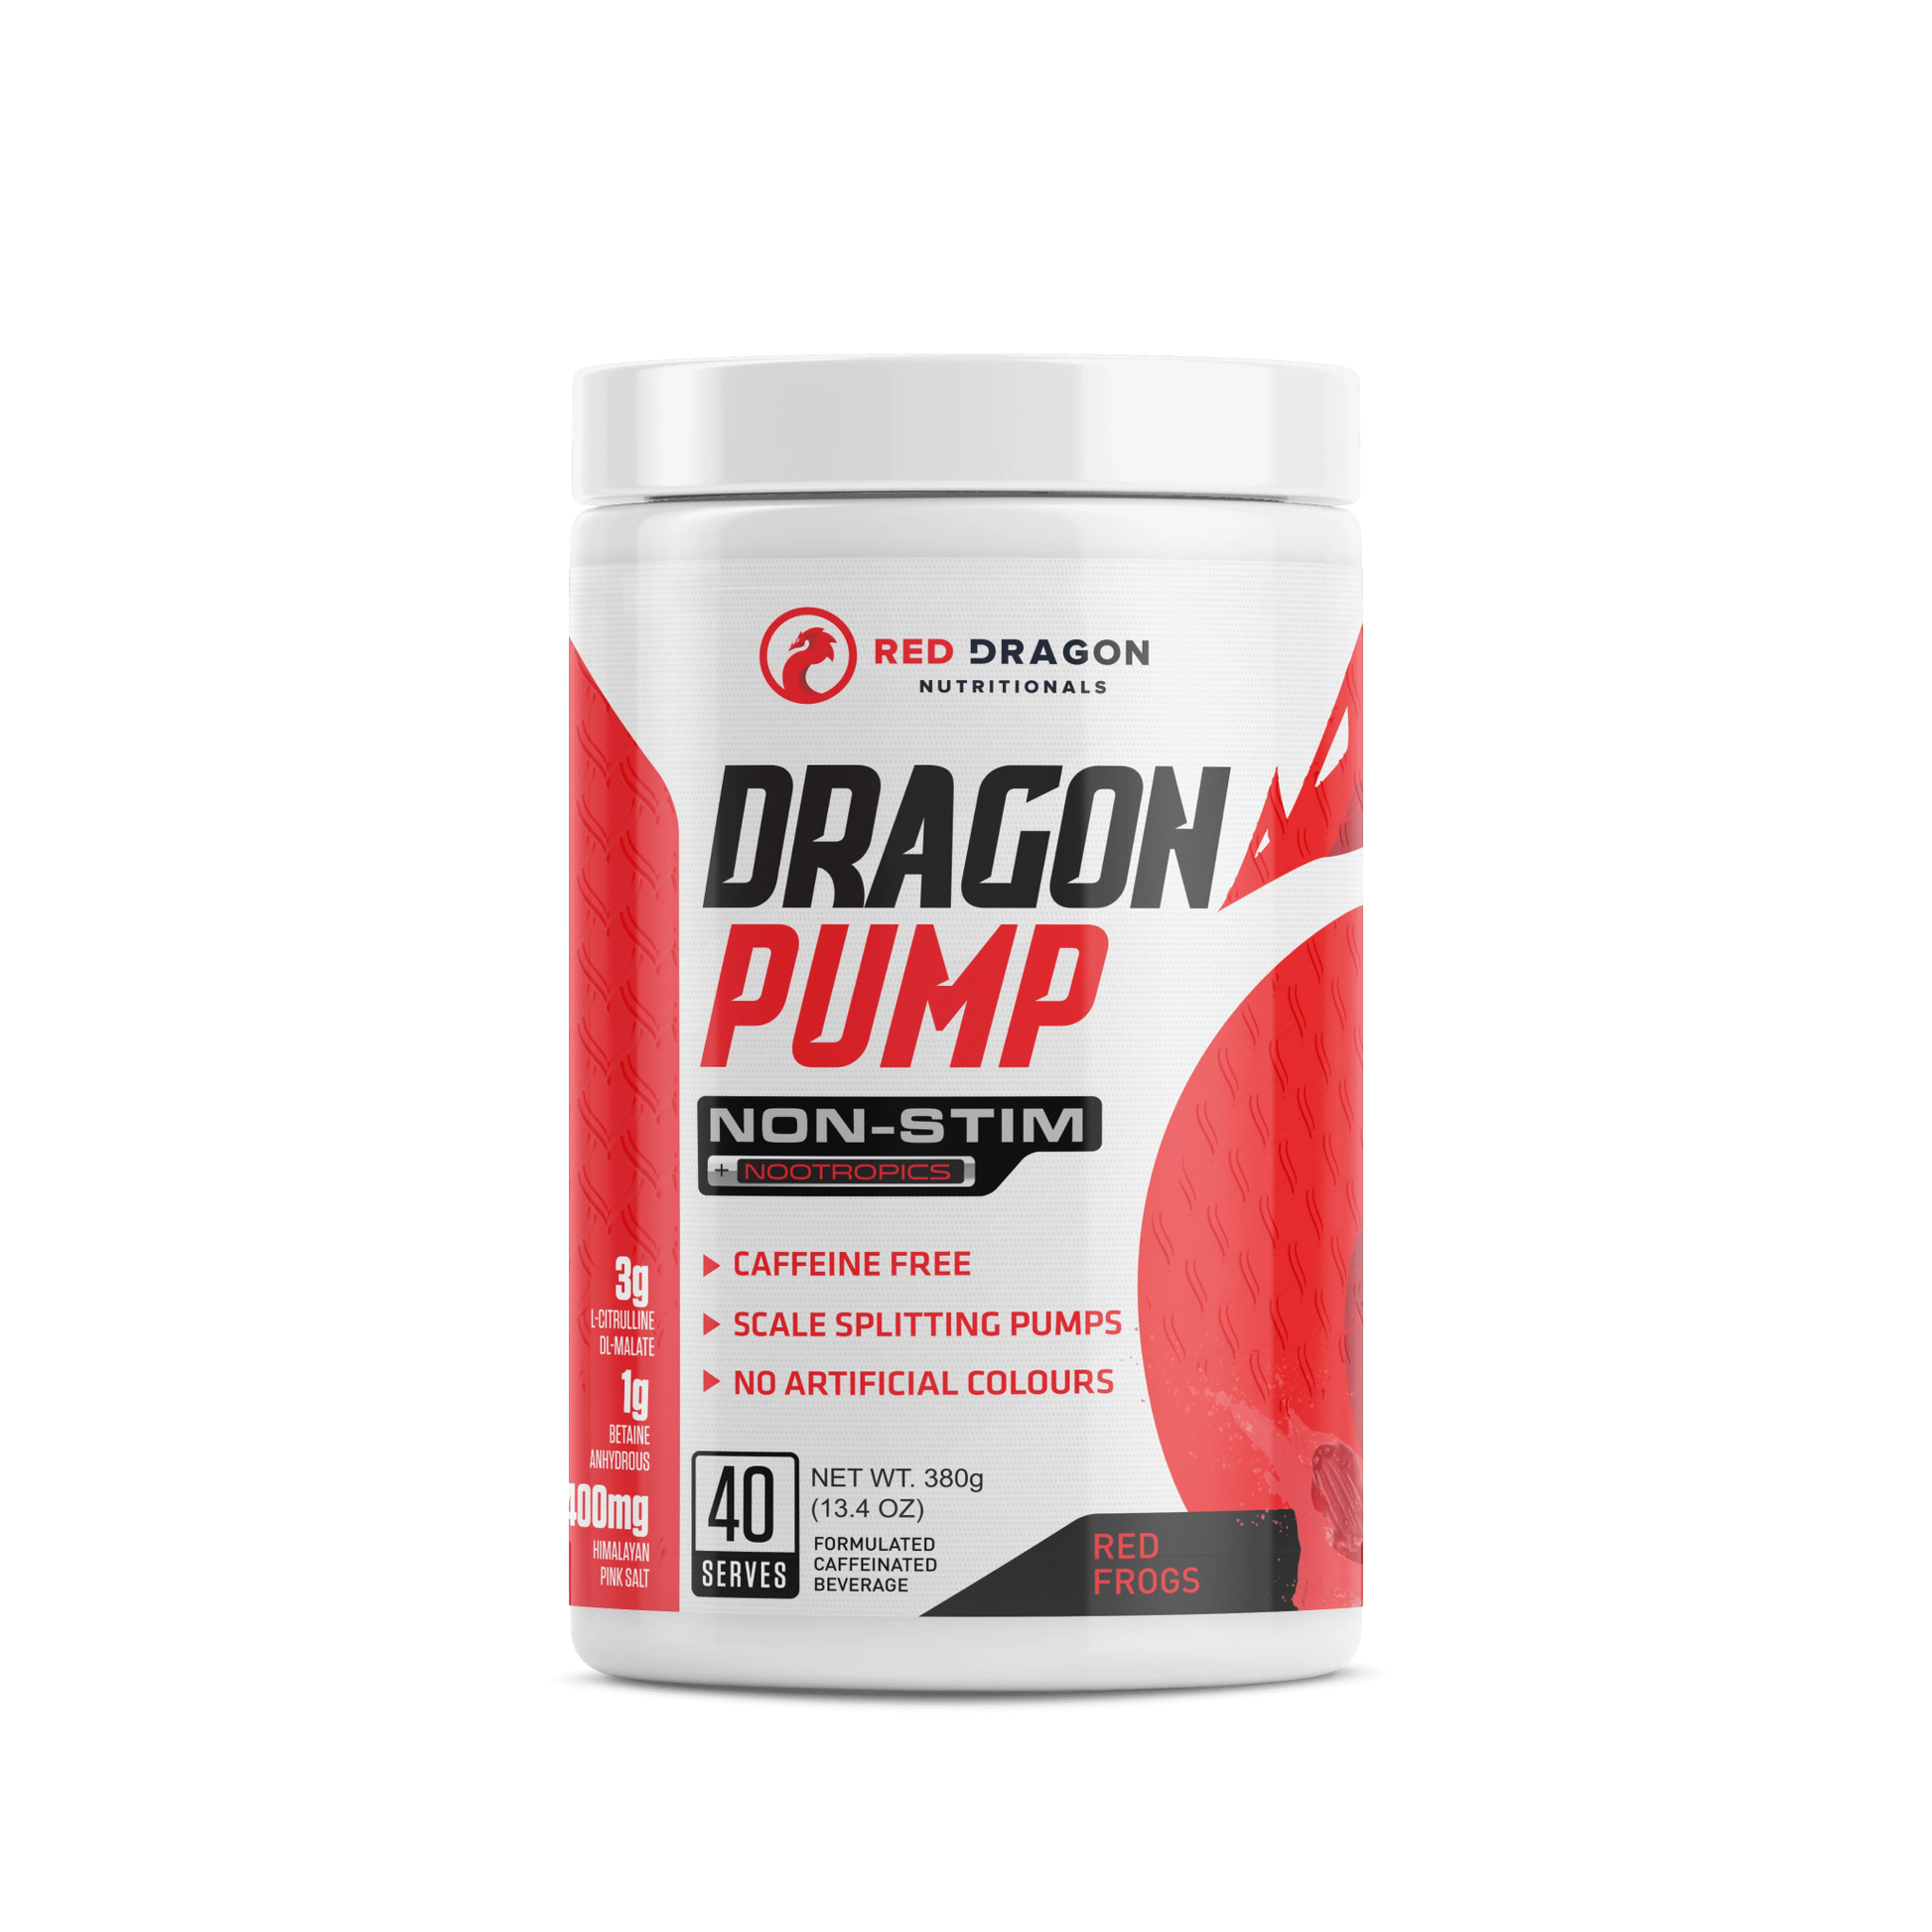 Red Dragon Nutritionals - Dragon Pump Pre-Workout Non-Stim - Supplements - 40 Serves - The Cave Gym